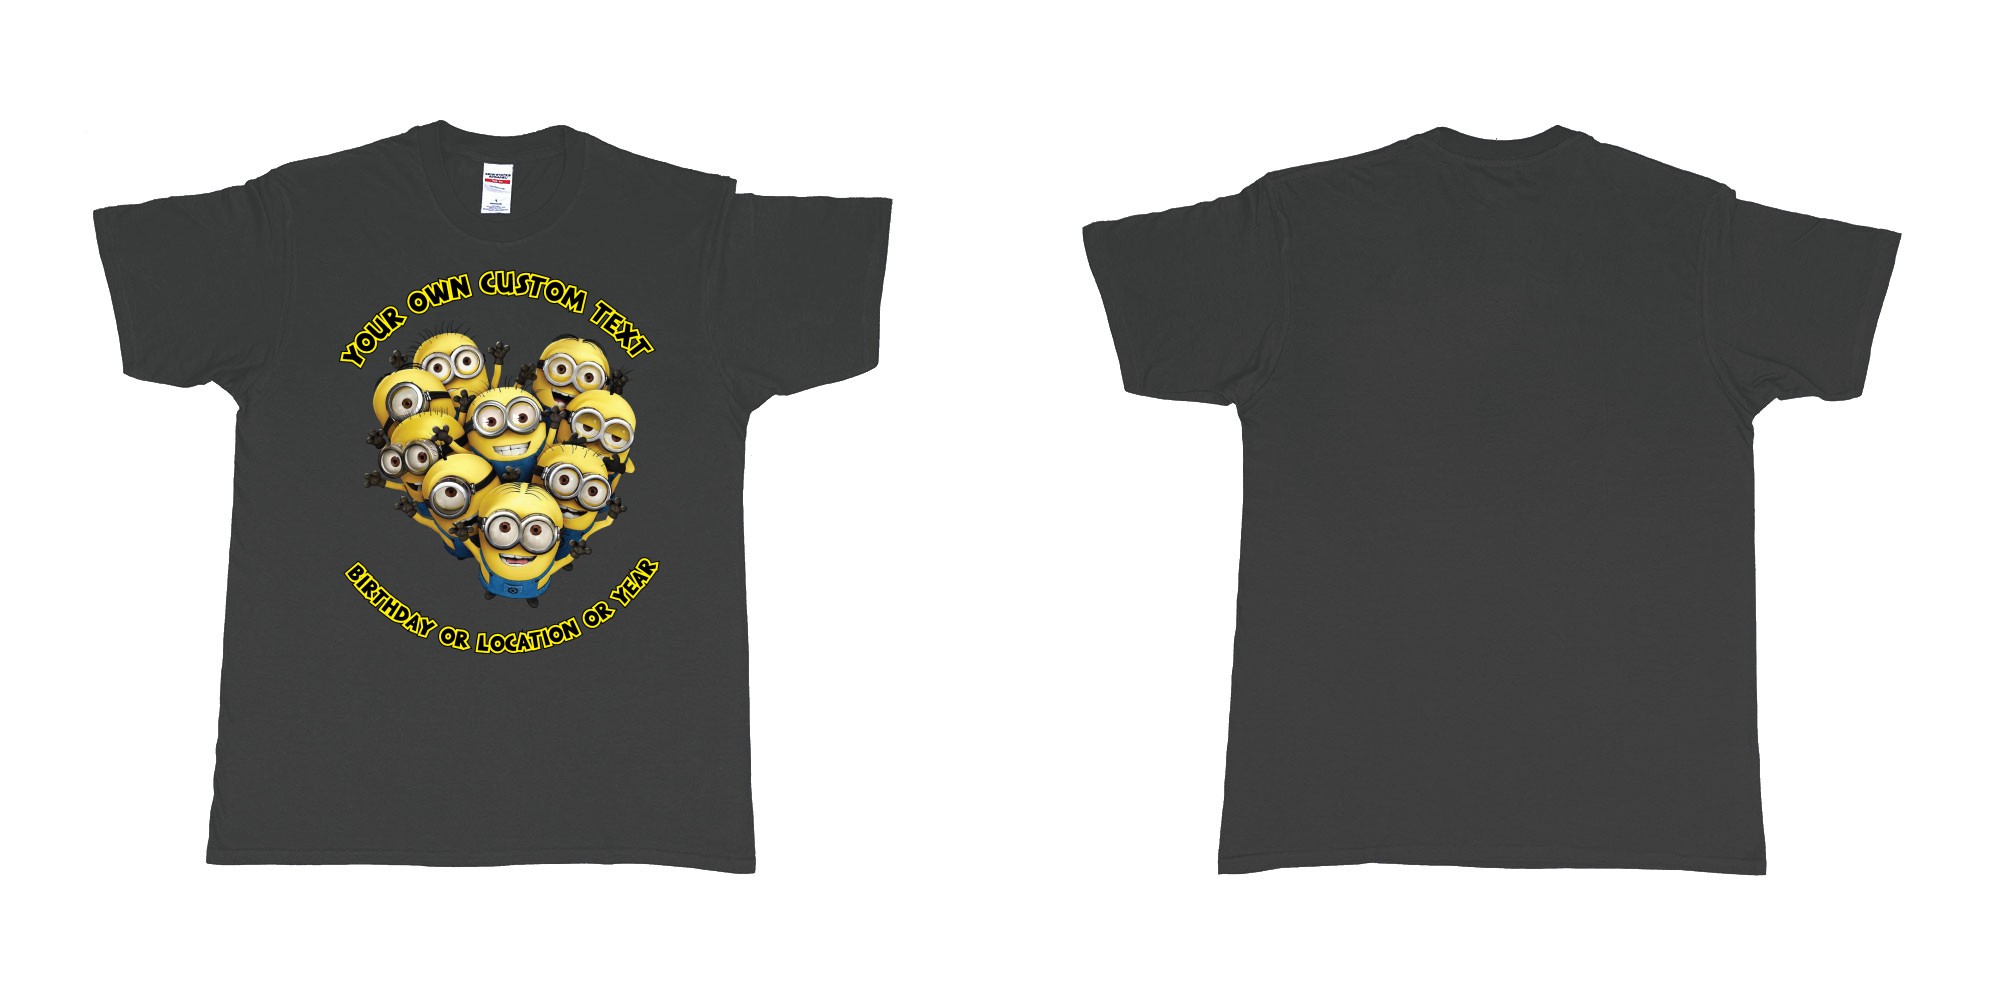 Custom tshirt design minions celebrating you in fabric color black choice your own text made in Bali by The Pirate Way